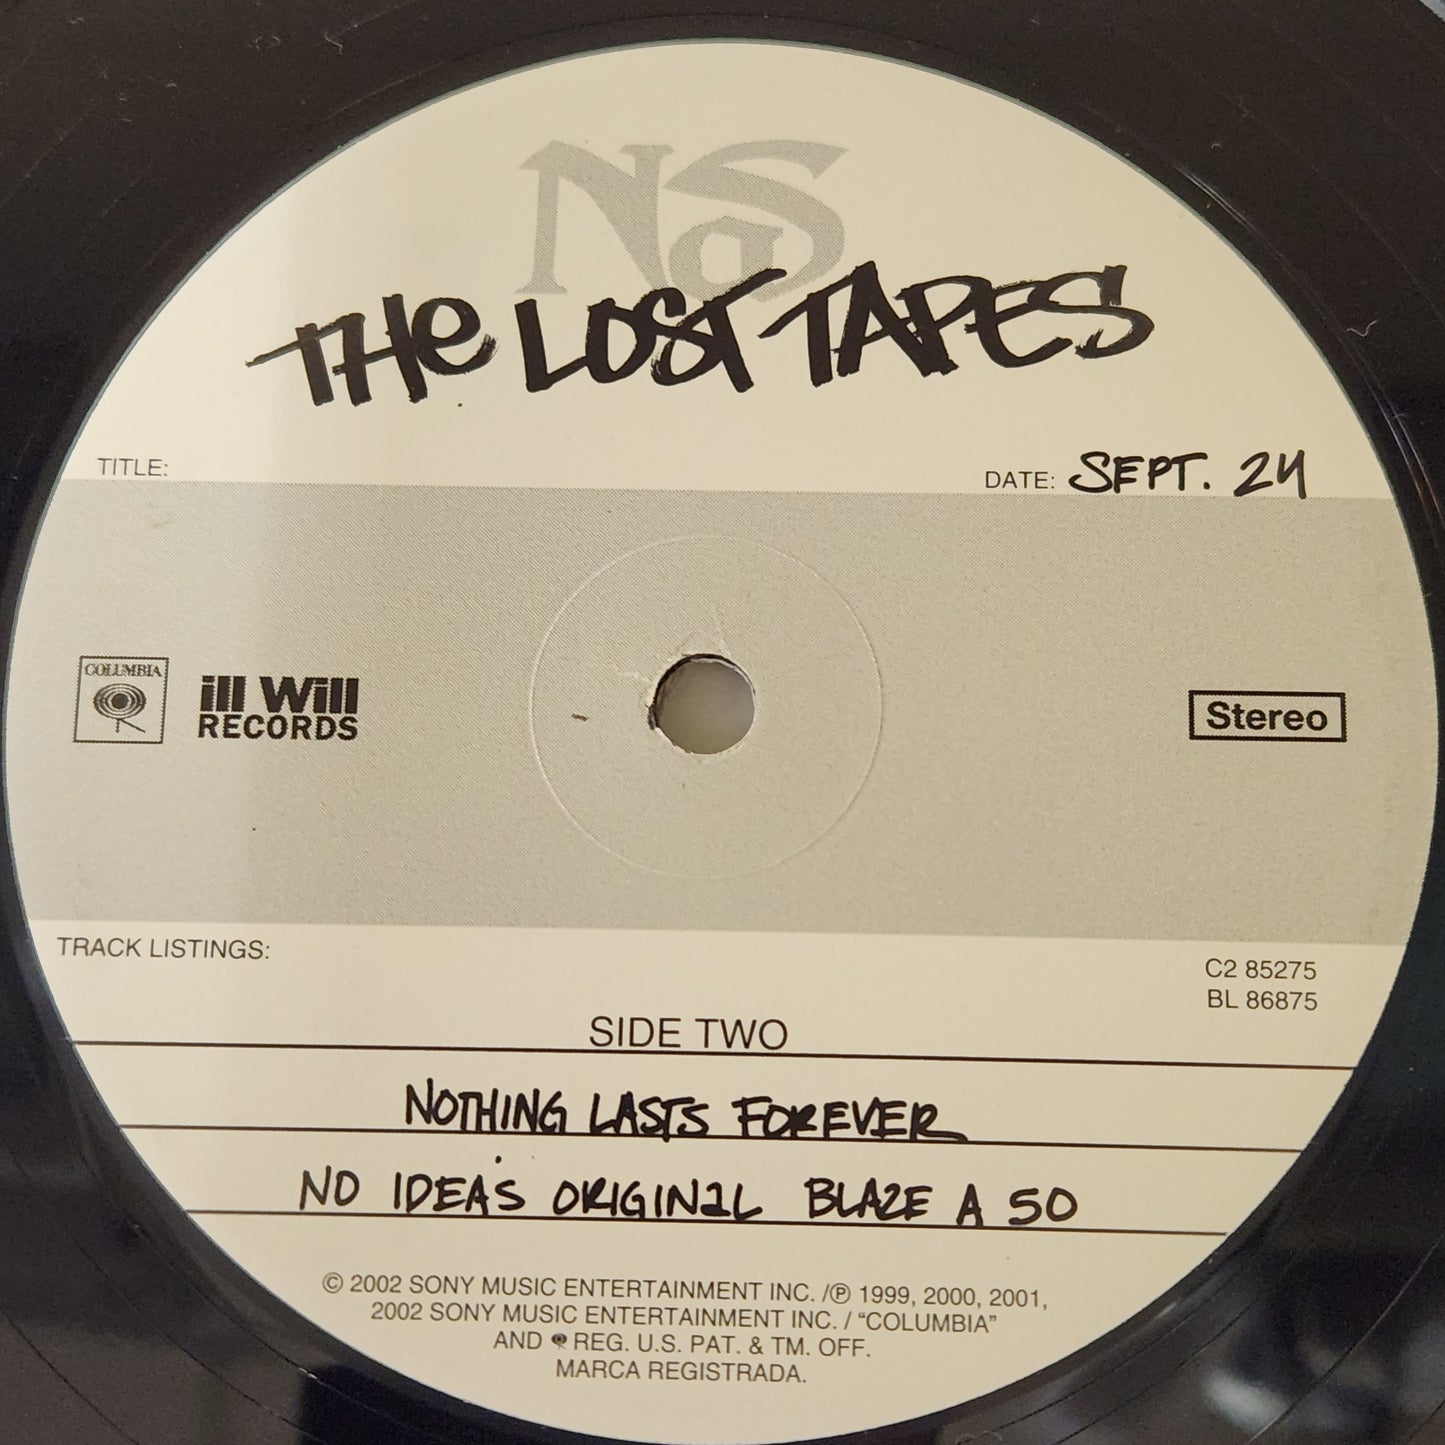 Nas "The Lost Tapes" 2002 Hip Hop 2 LP Record Album